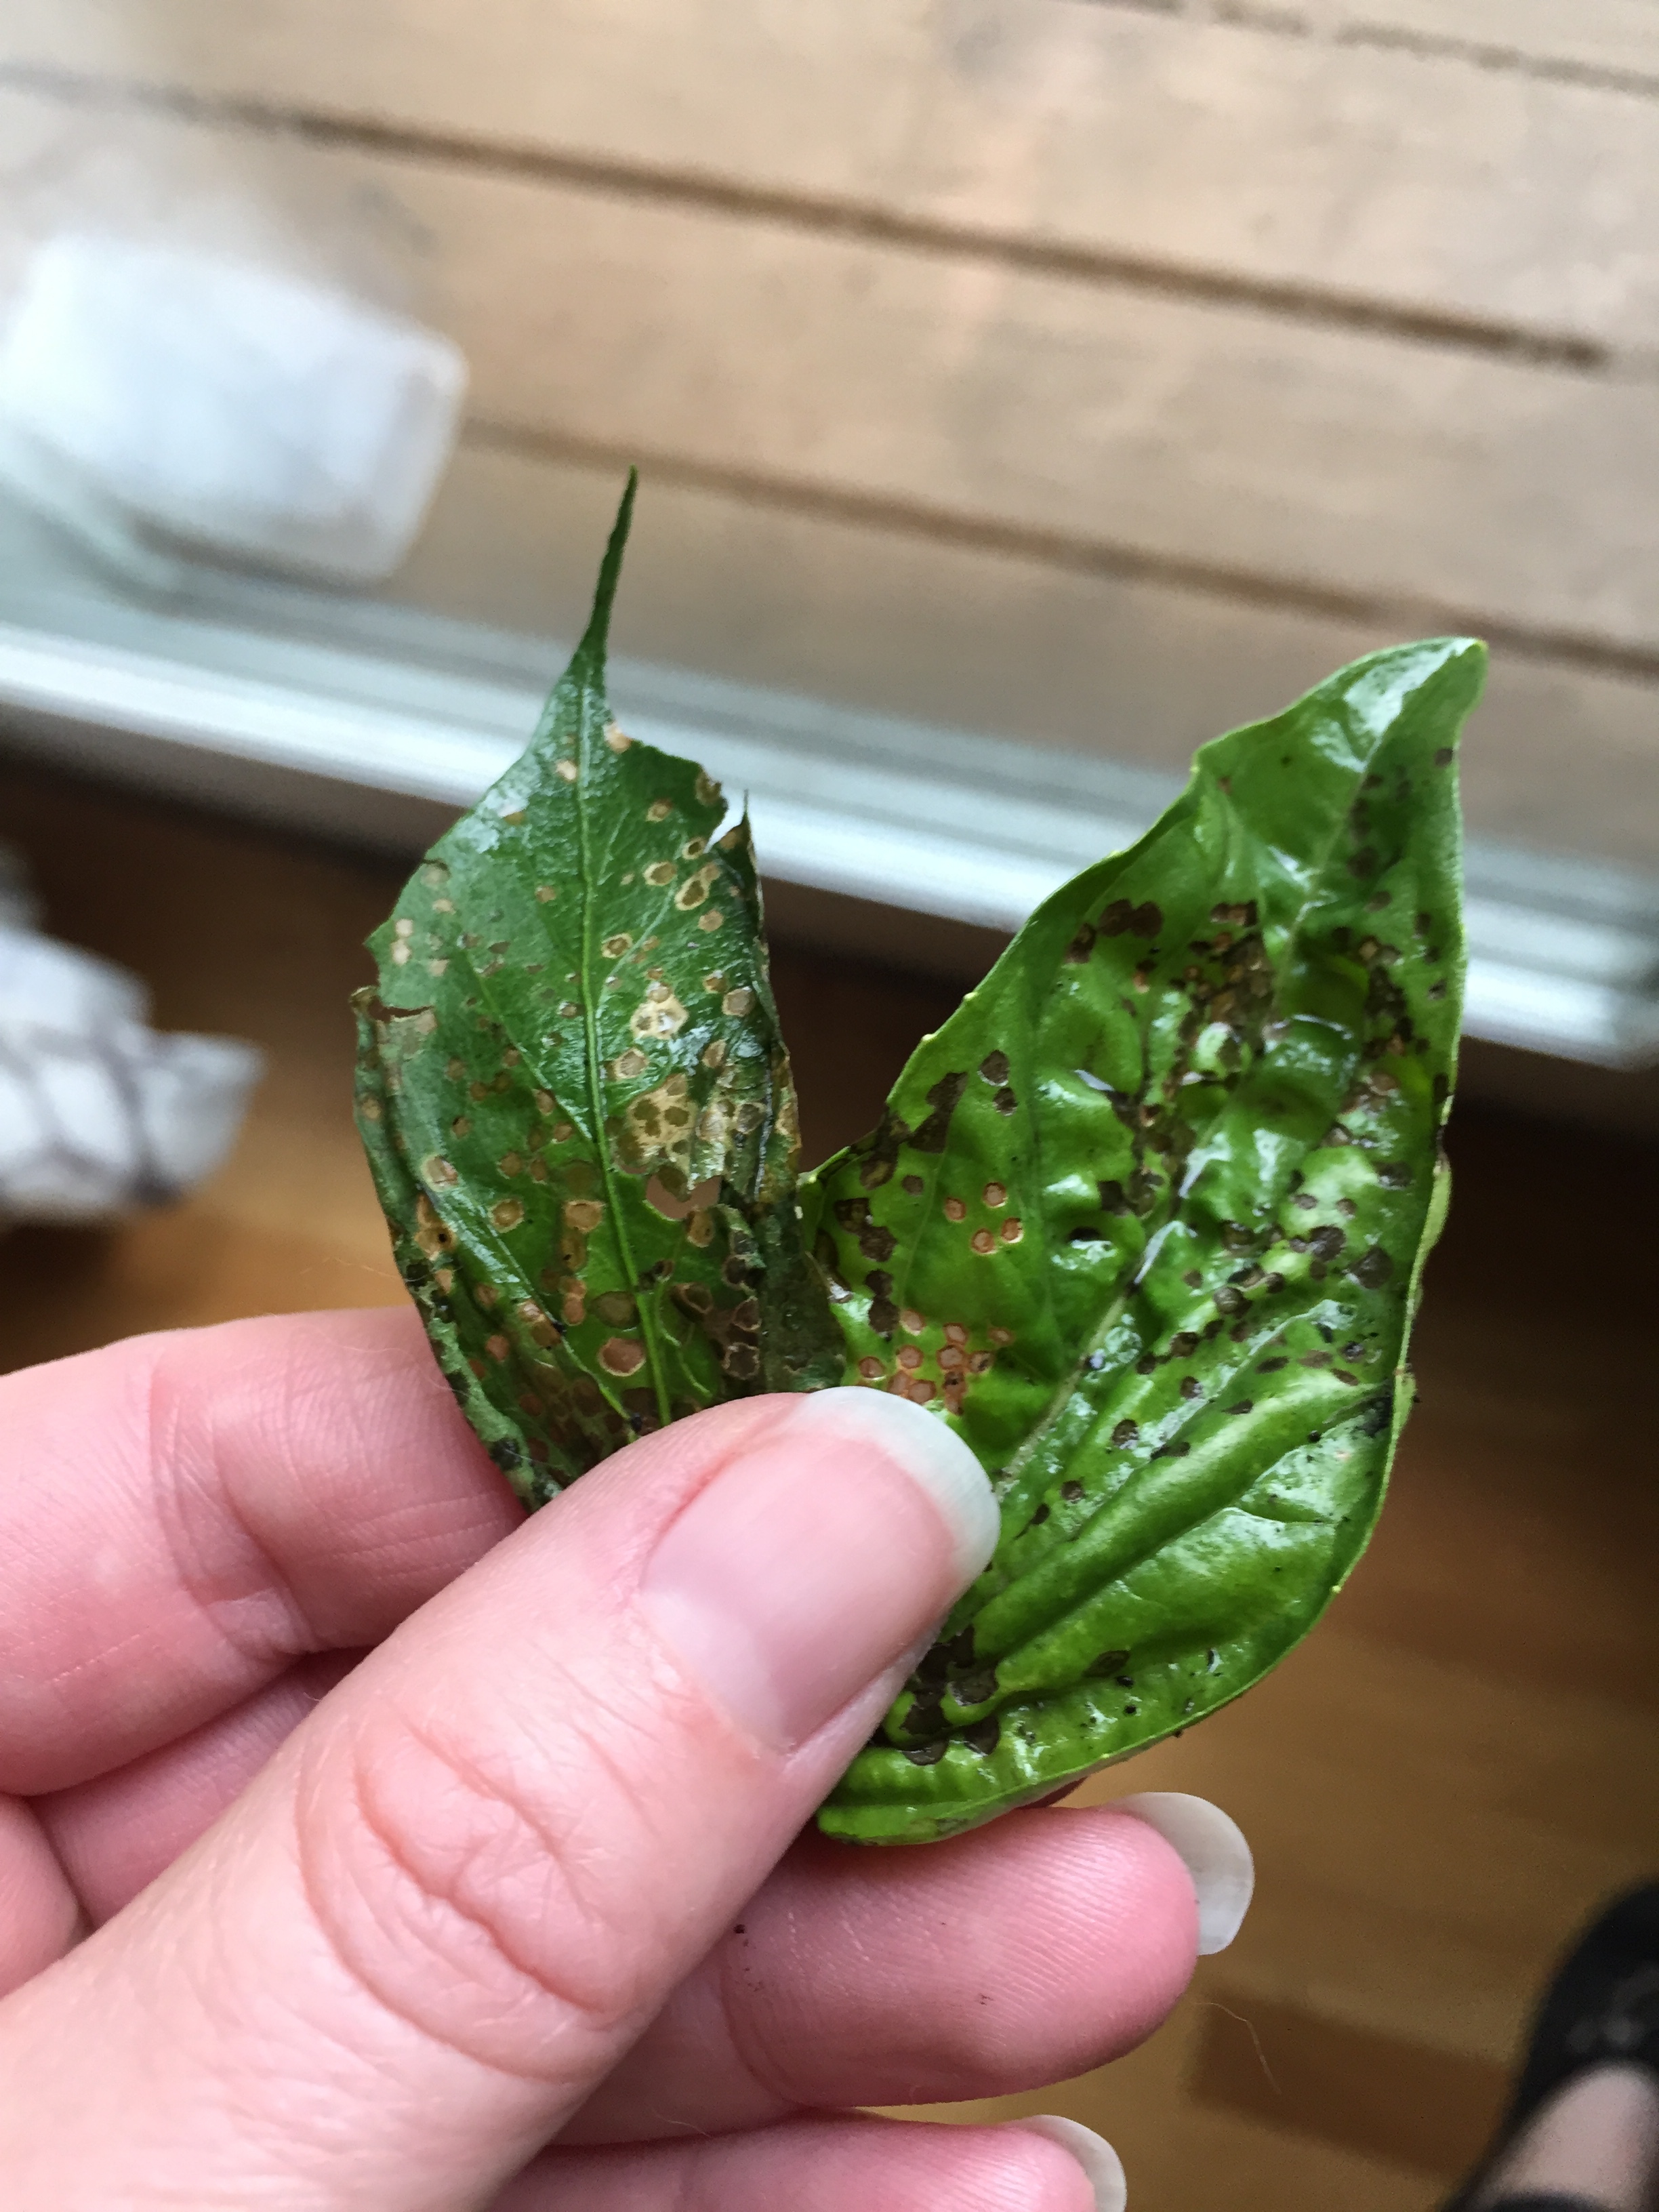 Black spots on basil and pepper plant - Ask an Expert